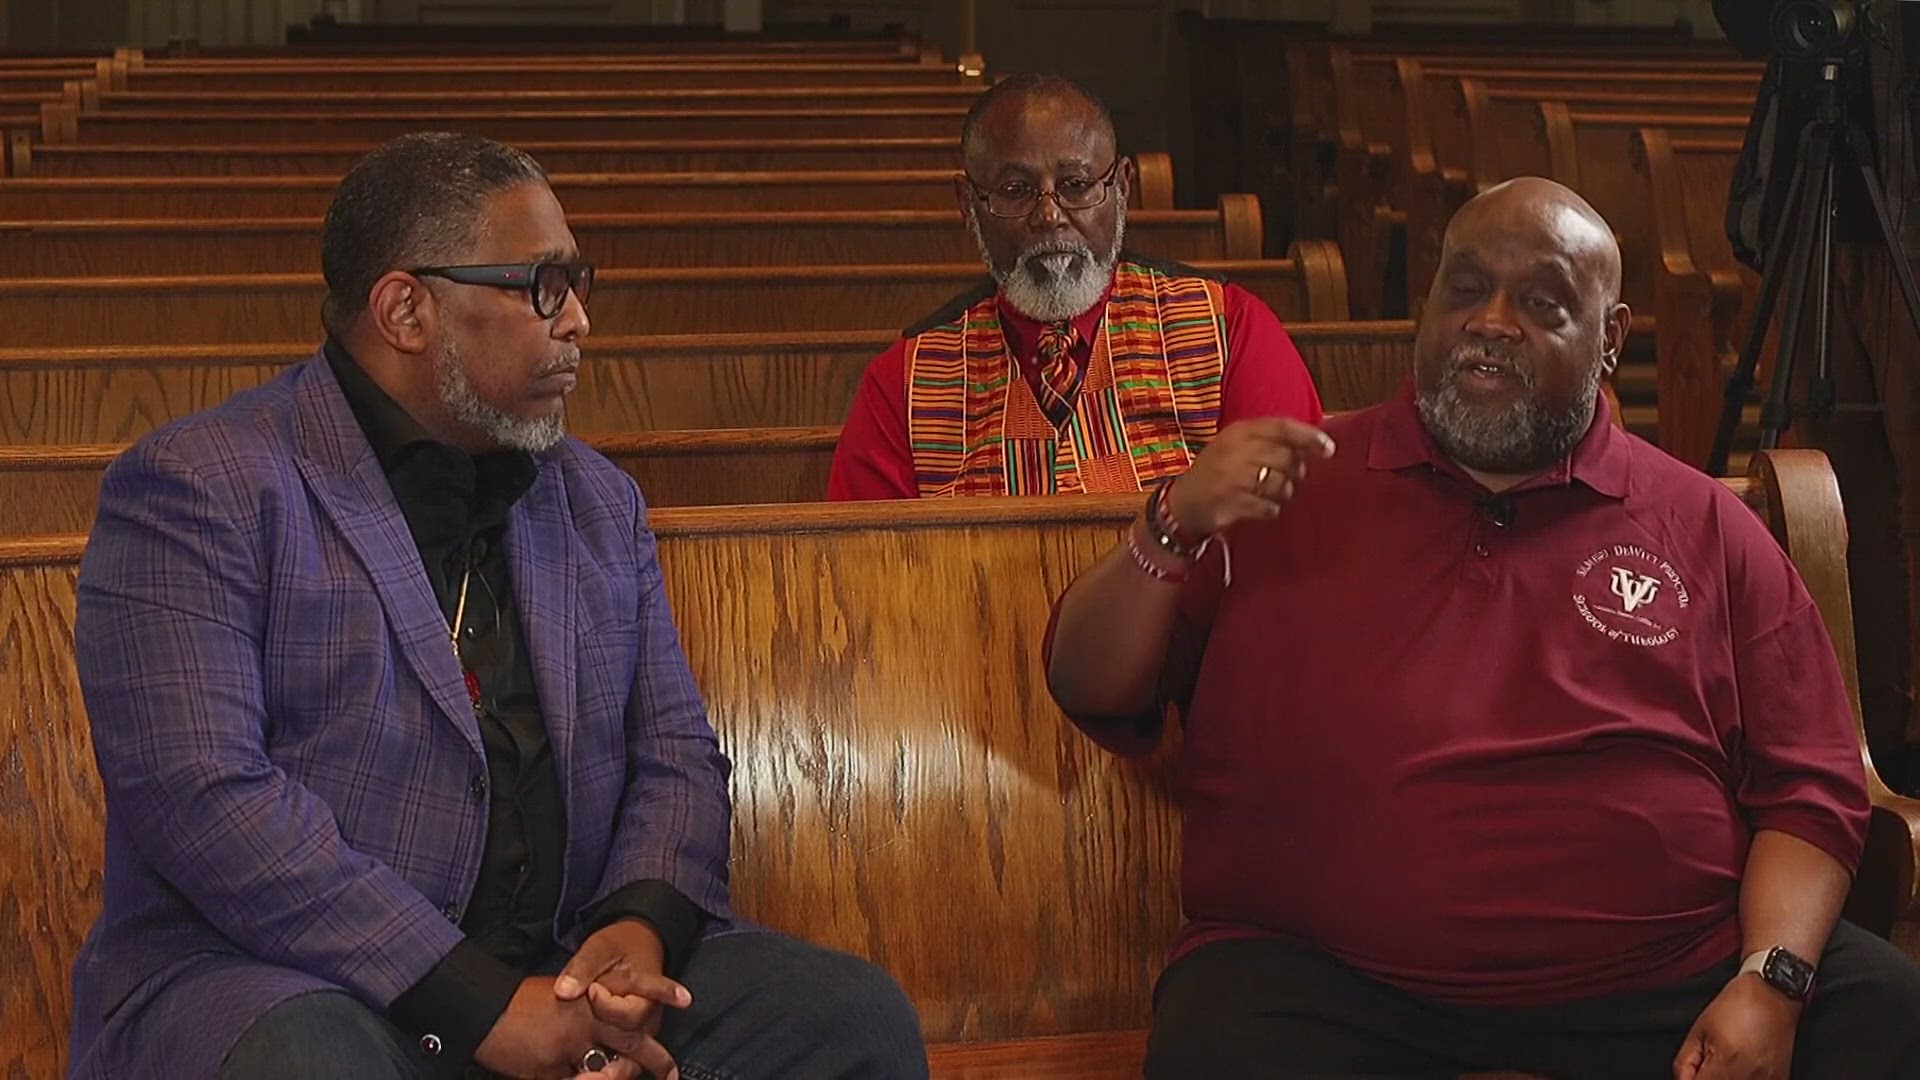 As Easter Sunday approaches Bishops Rudolph McKissick, John E. Guns and Pastor R.L. Gundy discuss the state of the Black church.